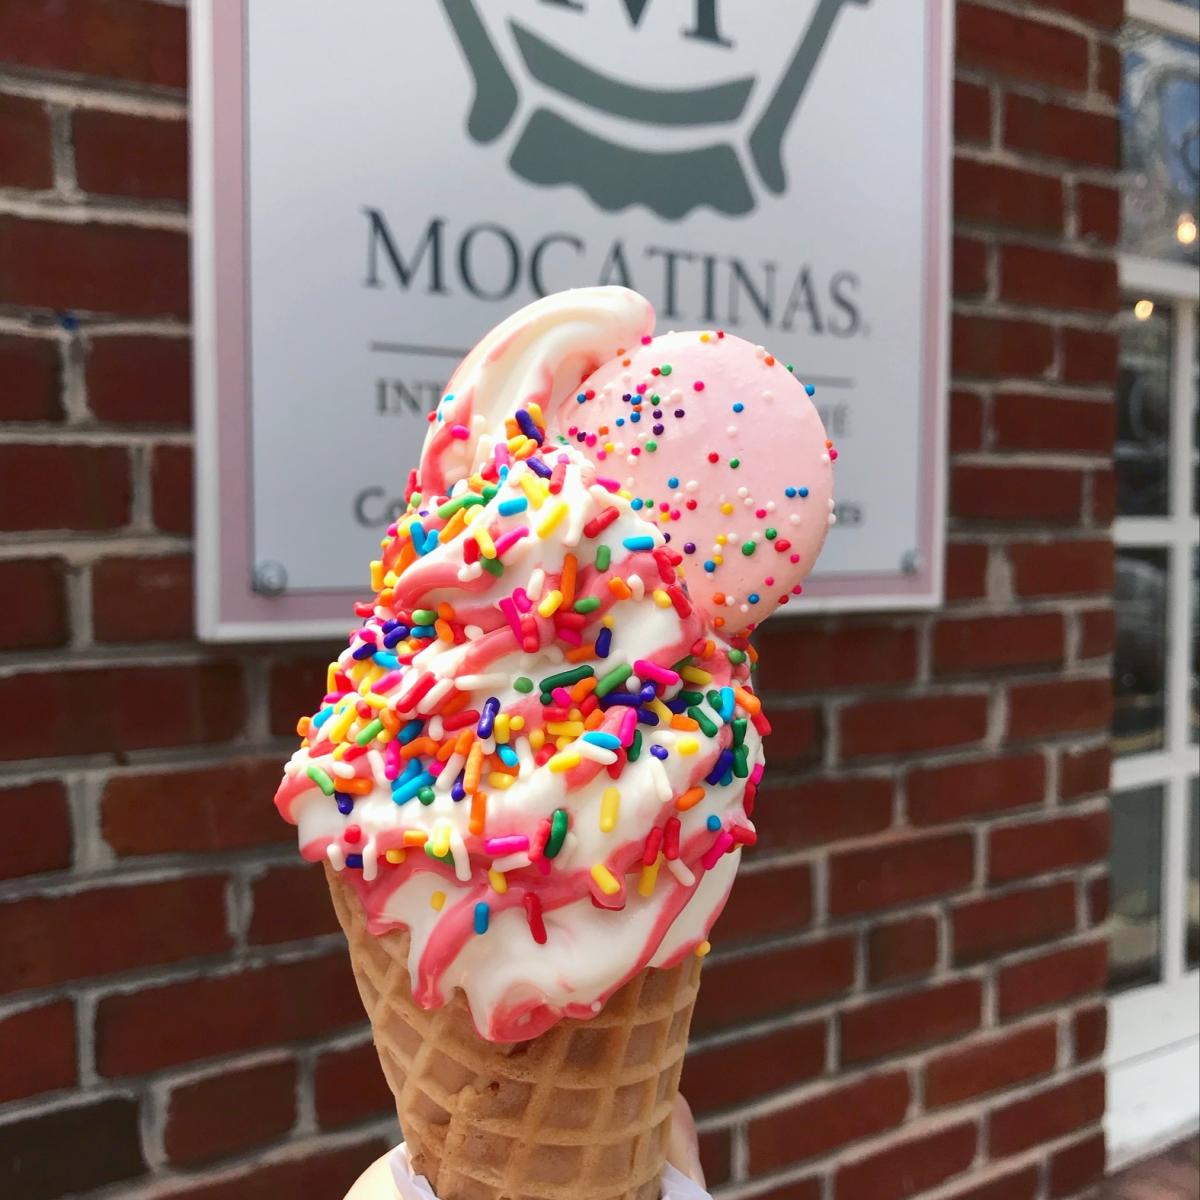 Mocatinas Ice cream in a waffle cone with a cookie and rainbow sprinkles on top